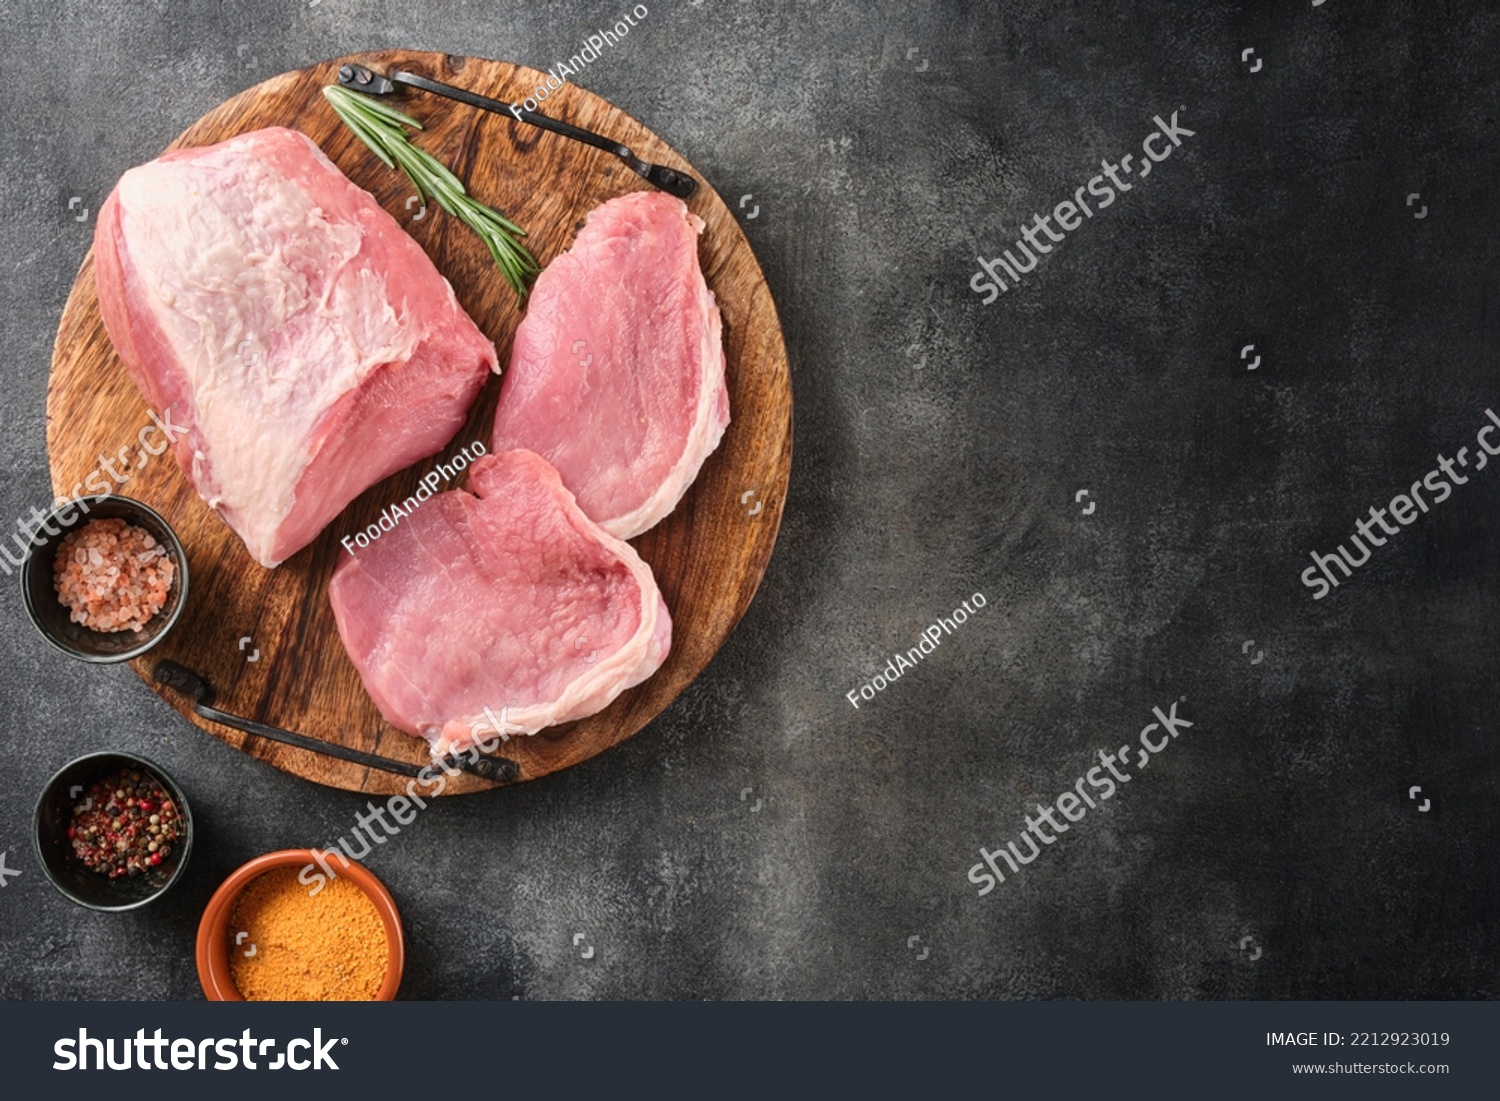 Raw pork meat on wooden board on grey background  with rosemary, salt and pepper. Pork loin. Copy space. Top view. #2212923019